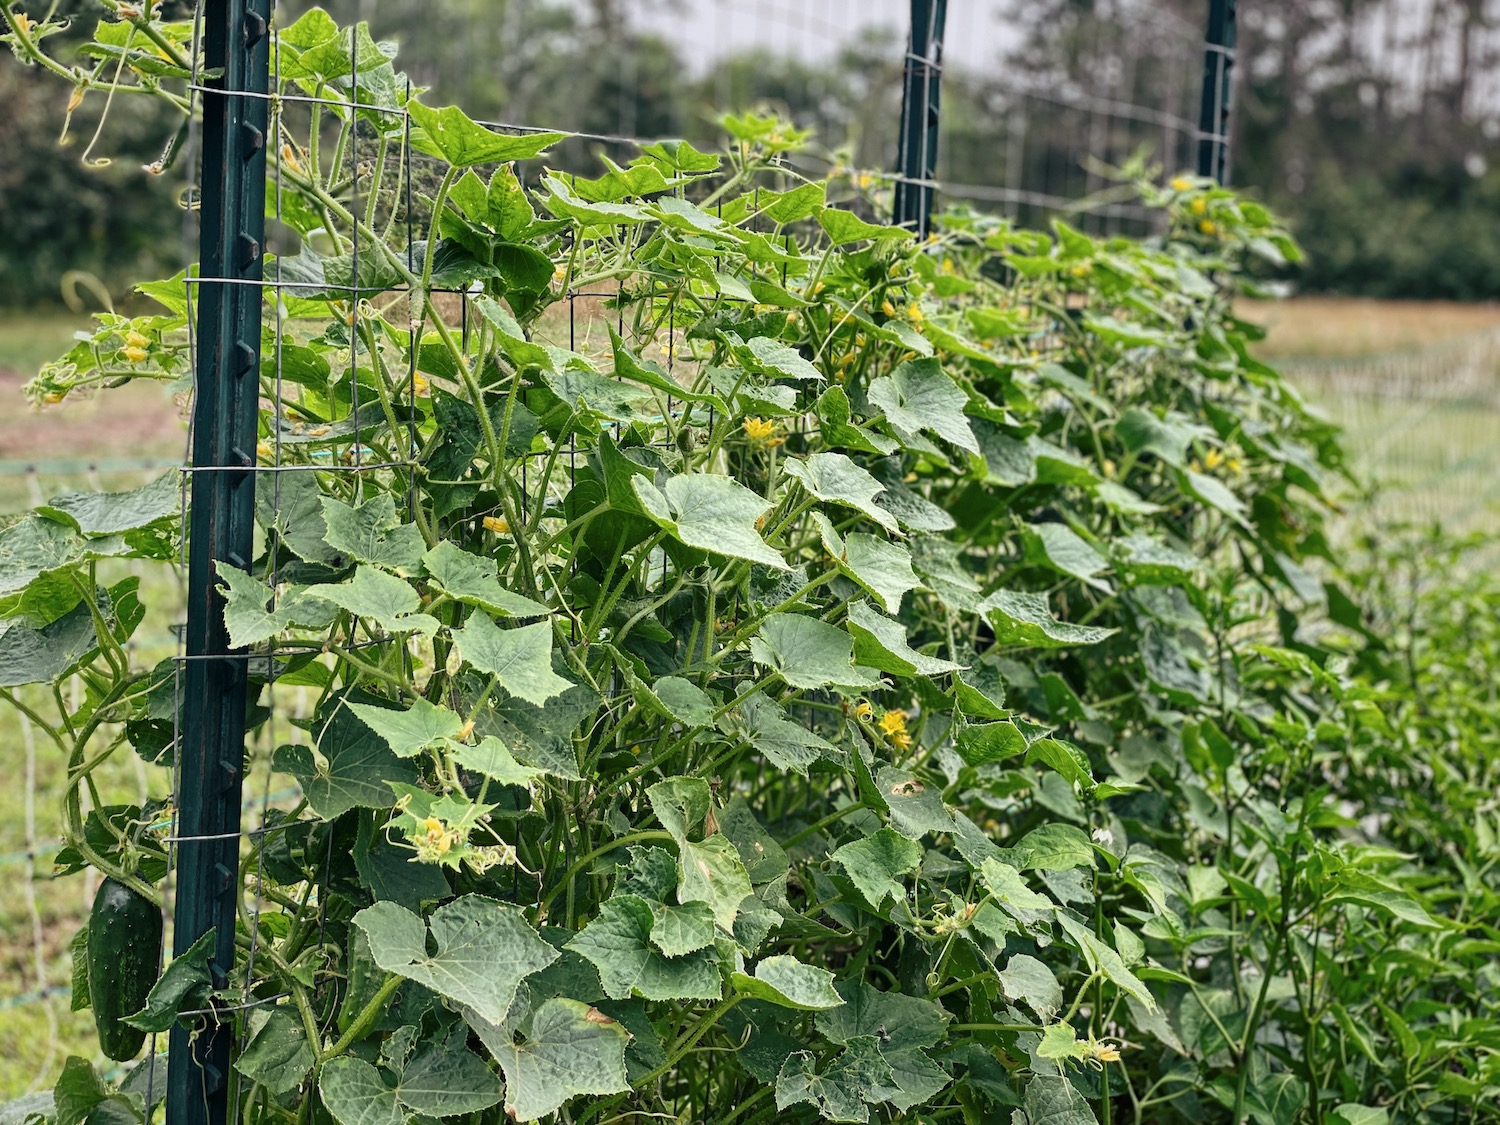 A row of healthy cucumber plants growing up a trellis